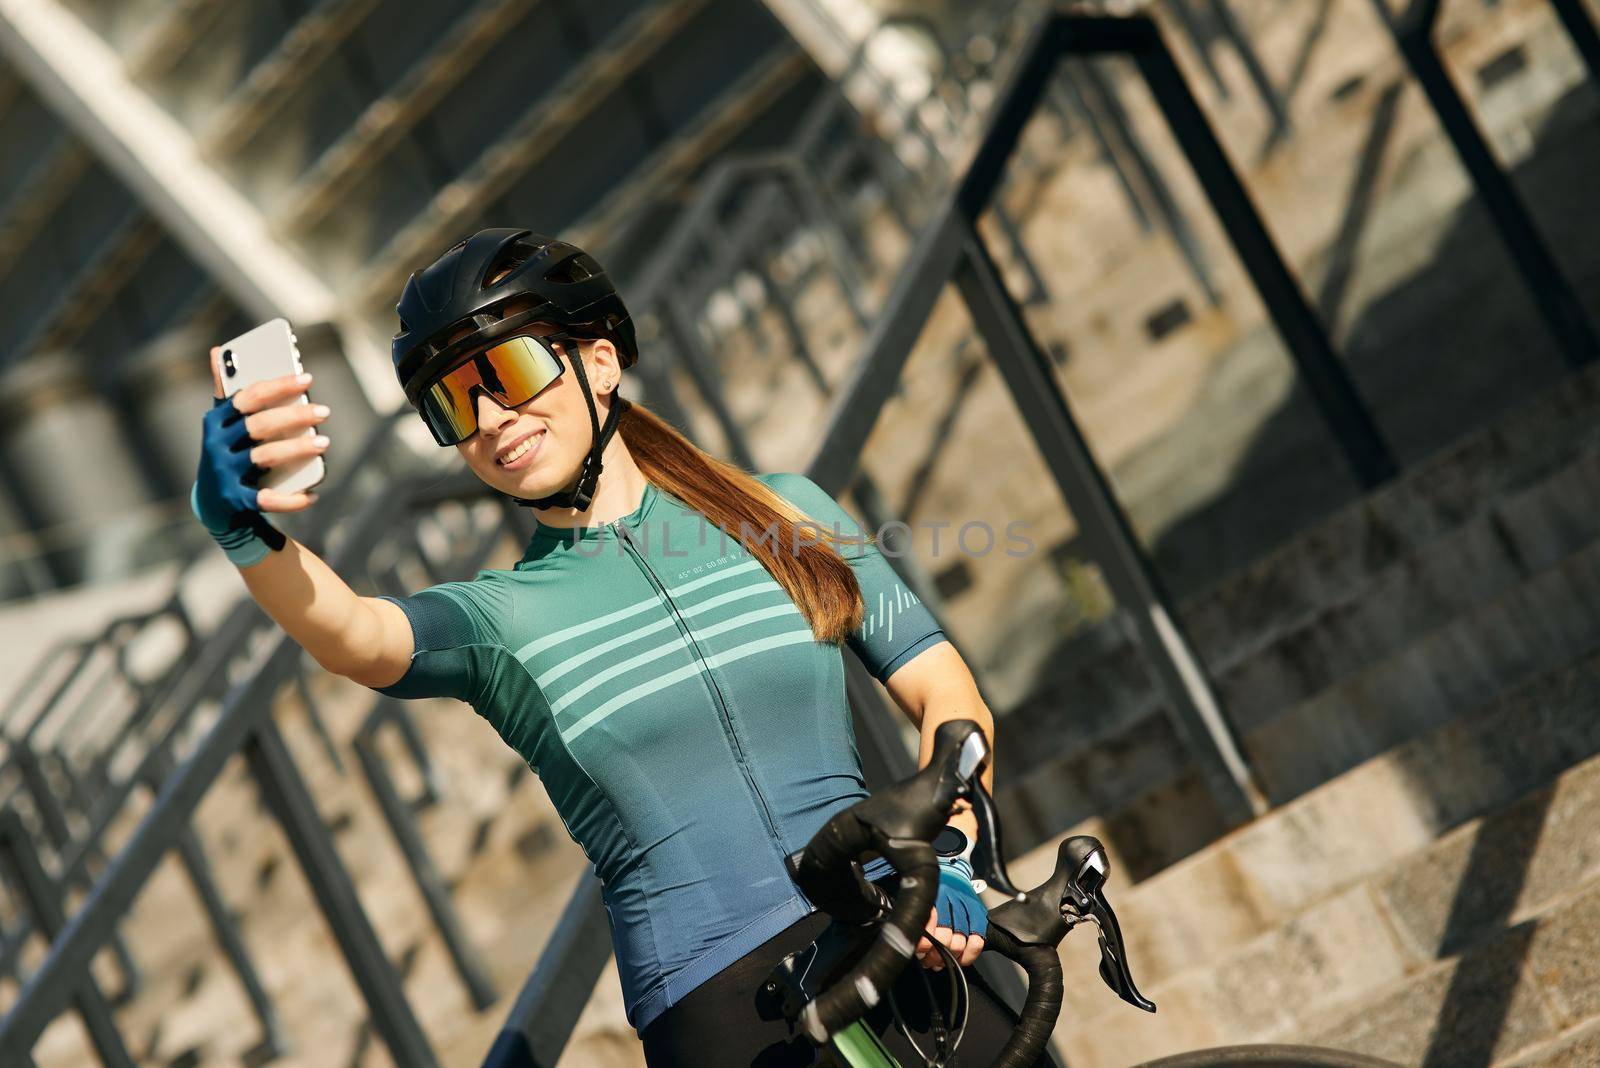 Joyful professional female cyclist in cycling garment and protective gear smiling while taking selfie using smartphone, standing and resting after riding bicycle in city center. Active lifestyle